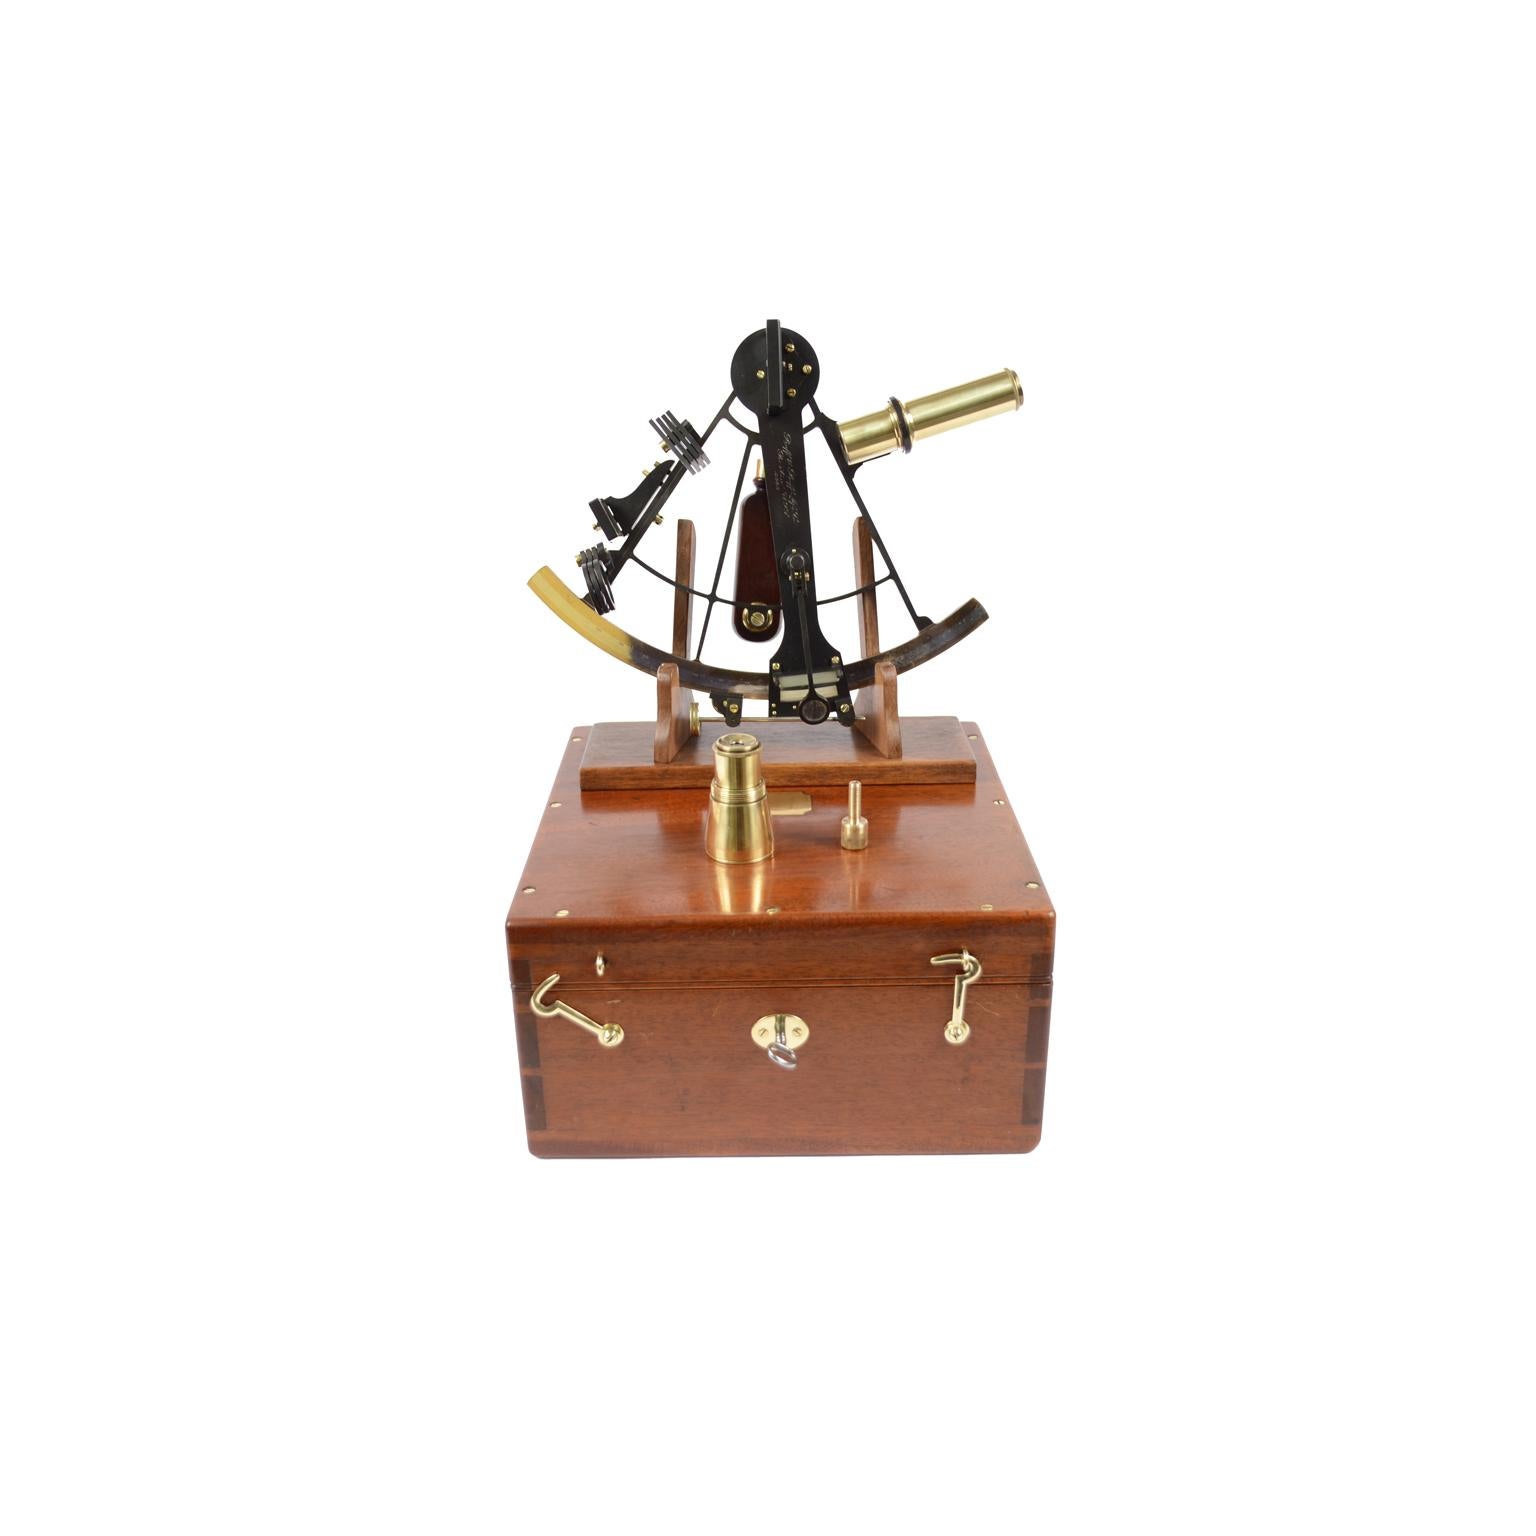 Brass sextant signed Buff & Buff Mfg Co Boston USA 5588 made in the beginning of the XX century, complete with lenses and compass placed in its original mahogany box complete with key lock and brass hinges. Silver flap and vernier, wooden handle, 3